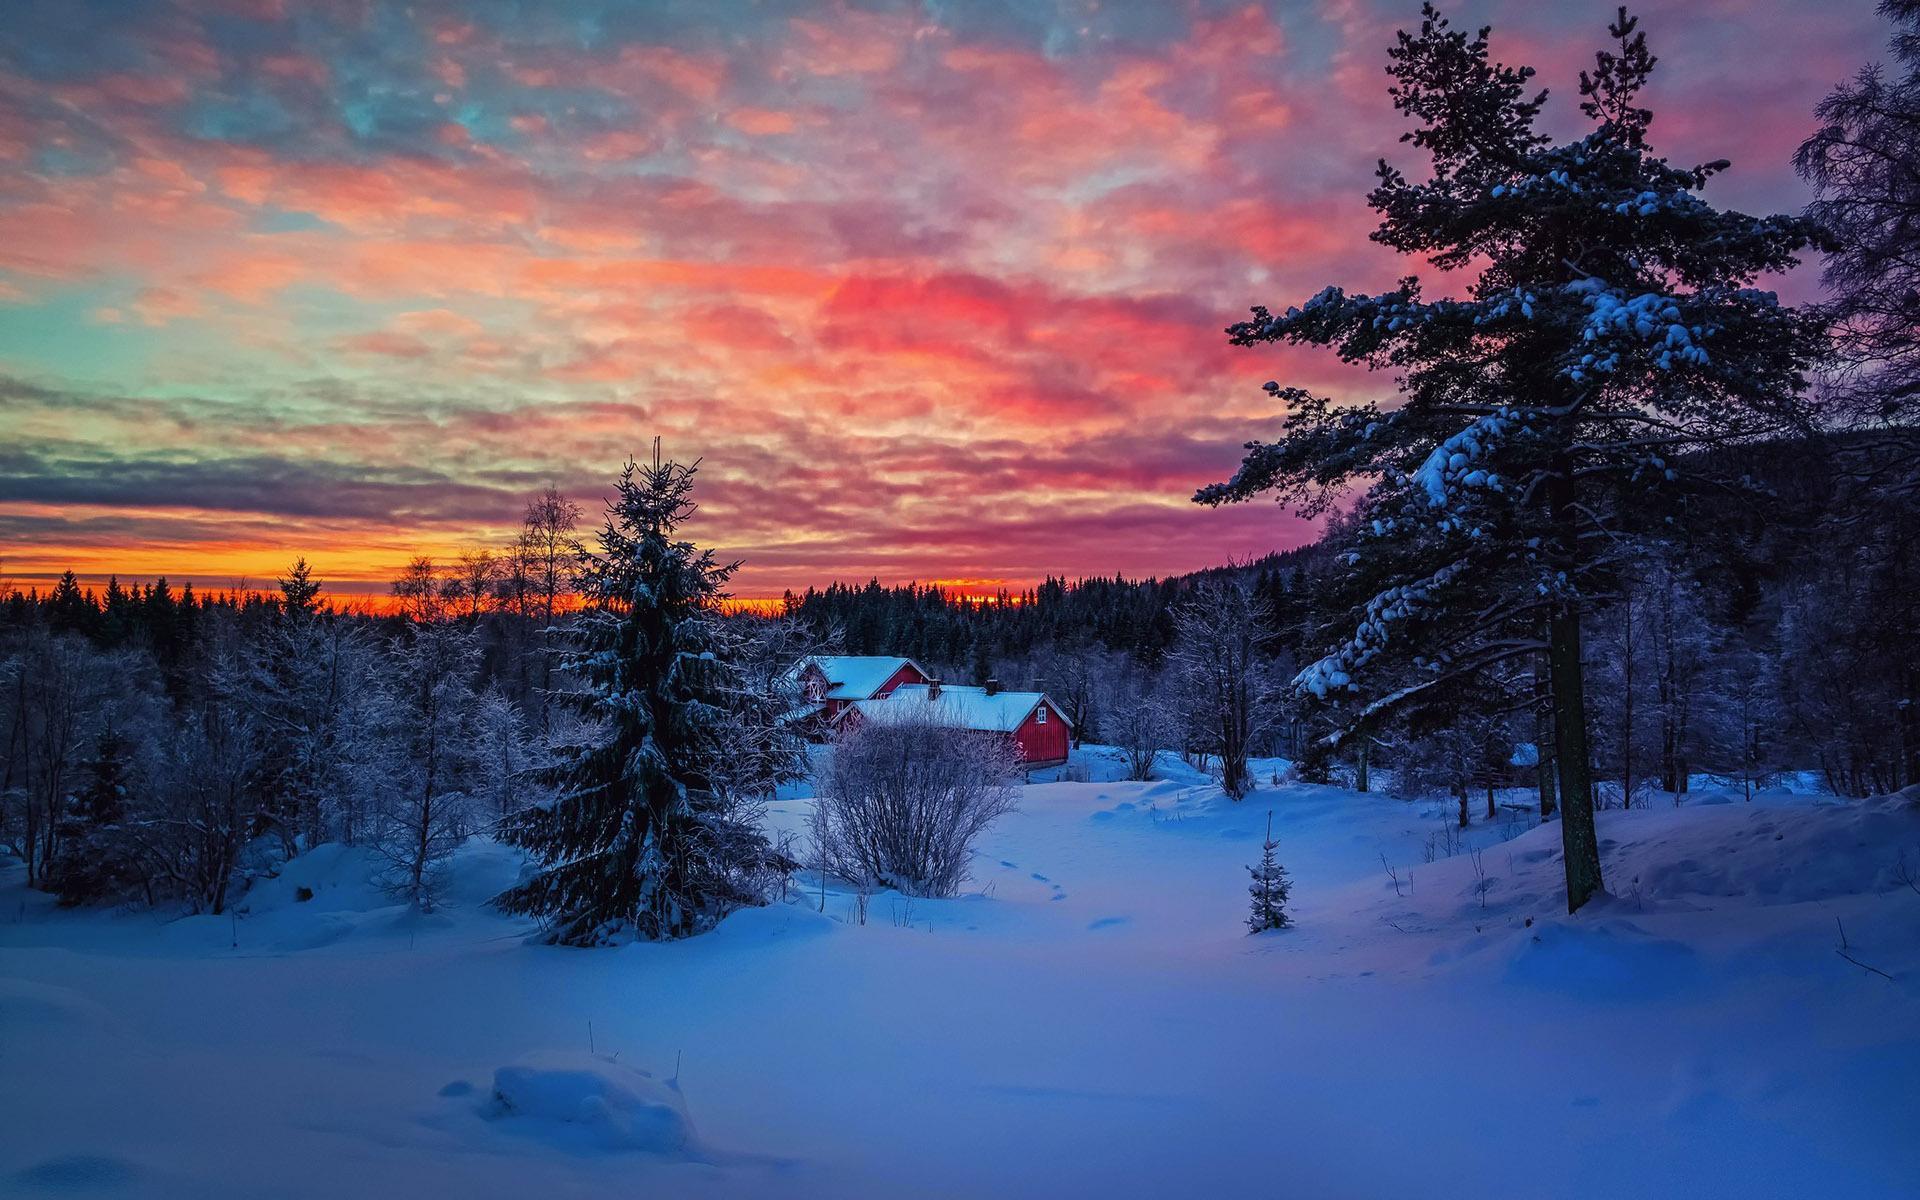 HD Pink sunset on the white snow Wallpaper. Download Free